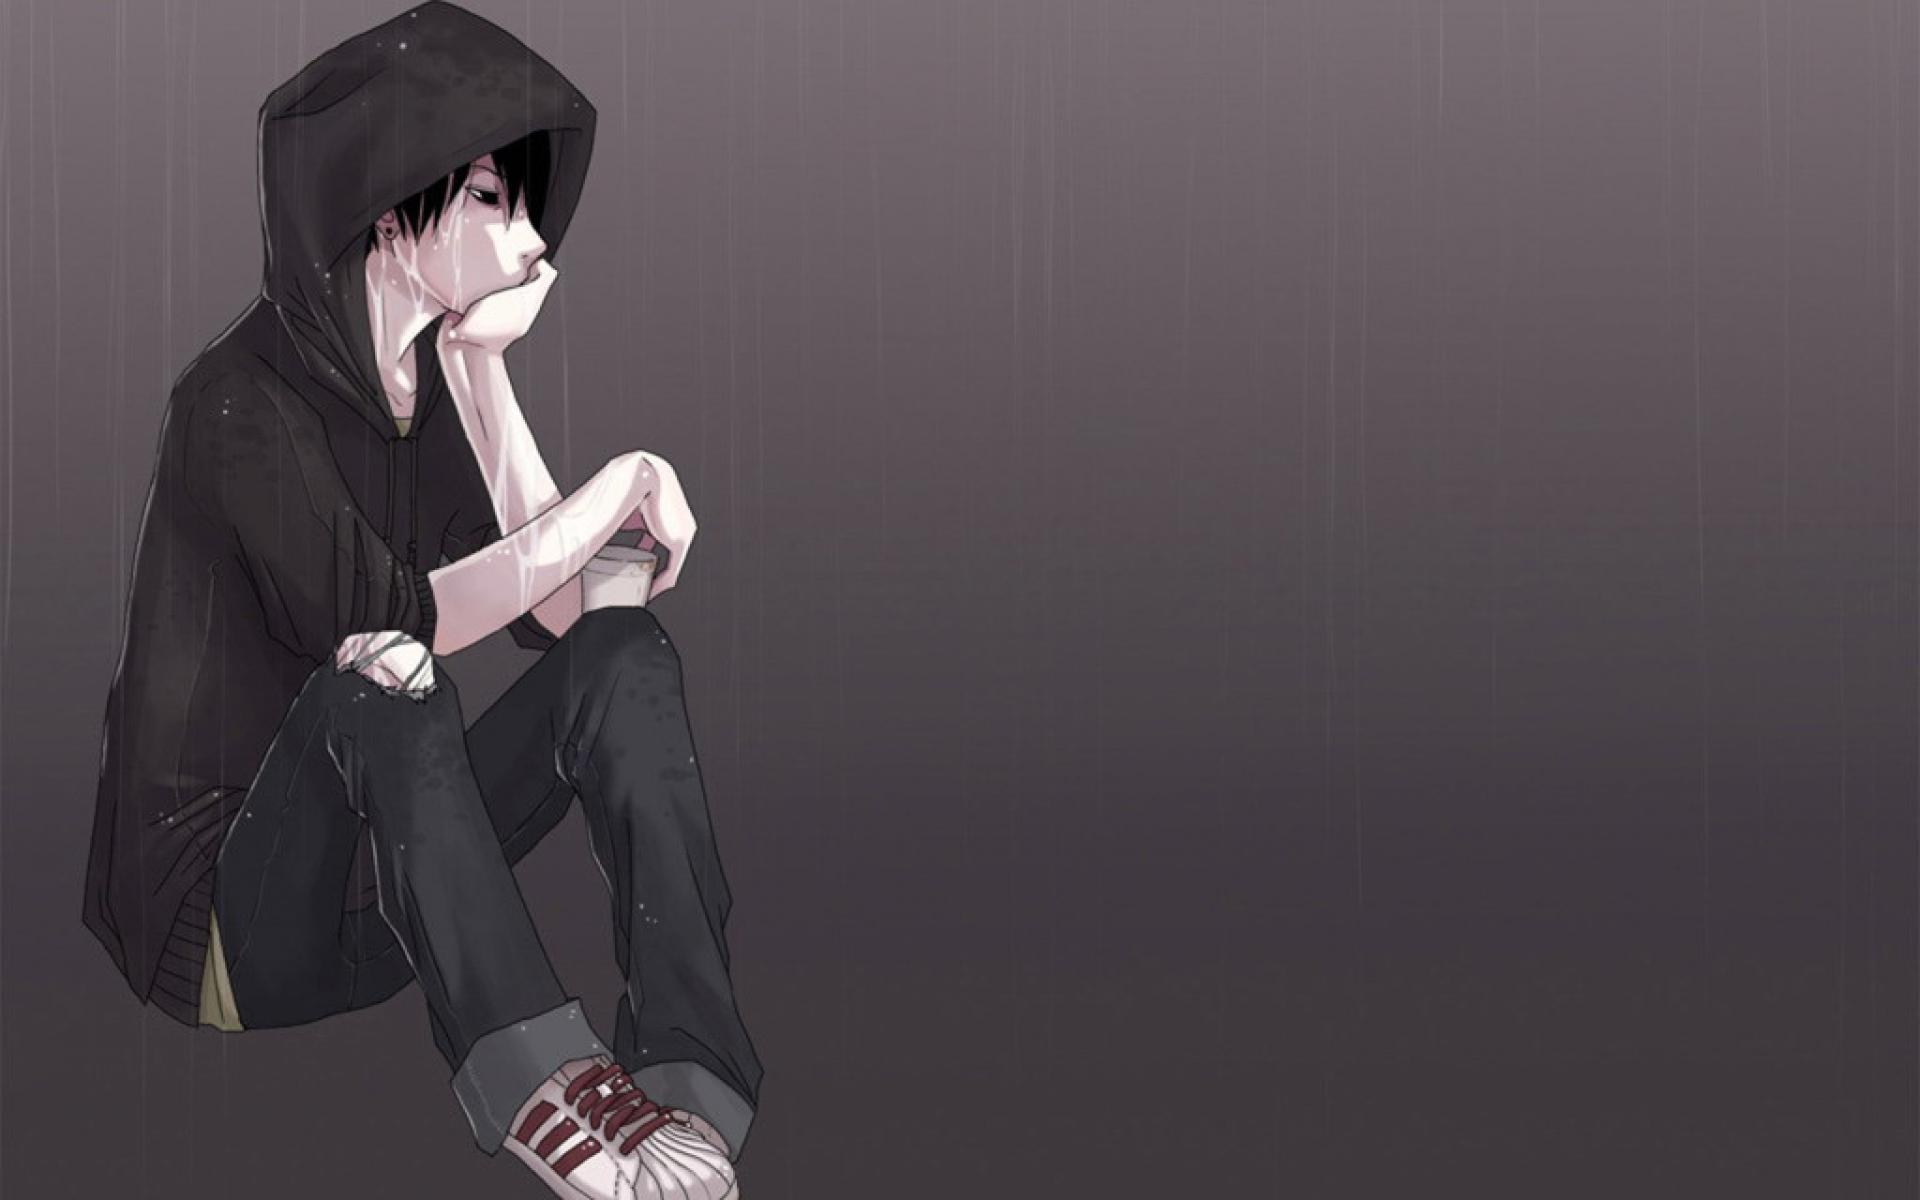 Wallpaper Anime Boy Posted By Zoey Anderson